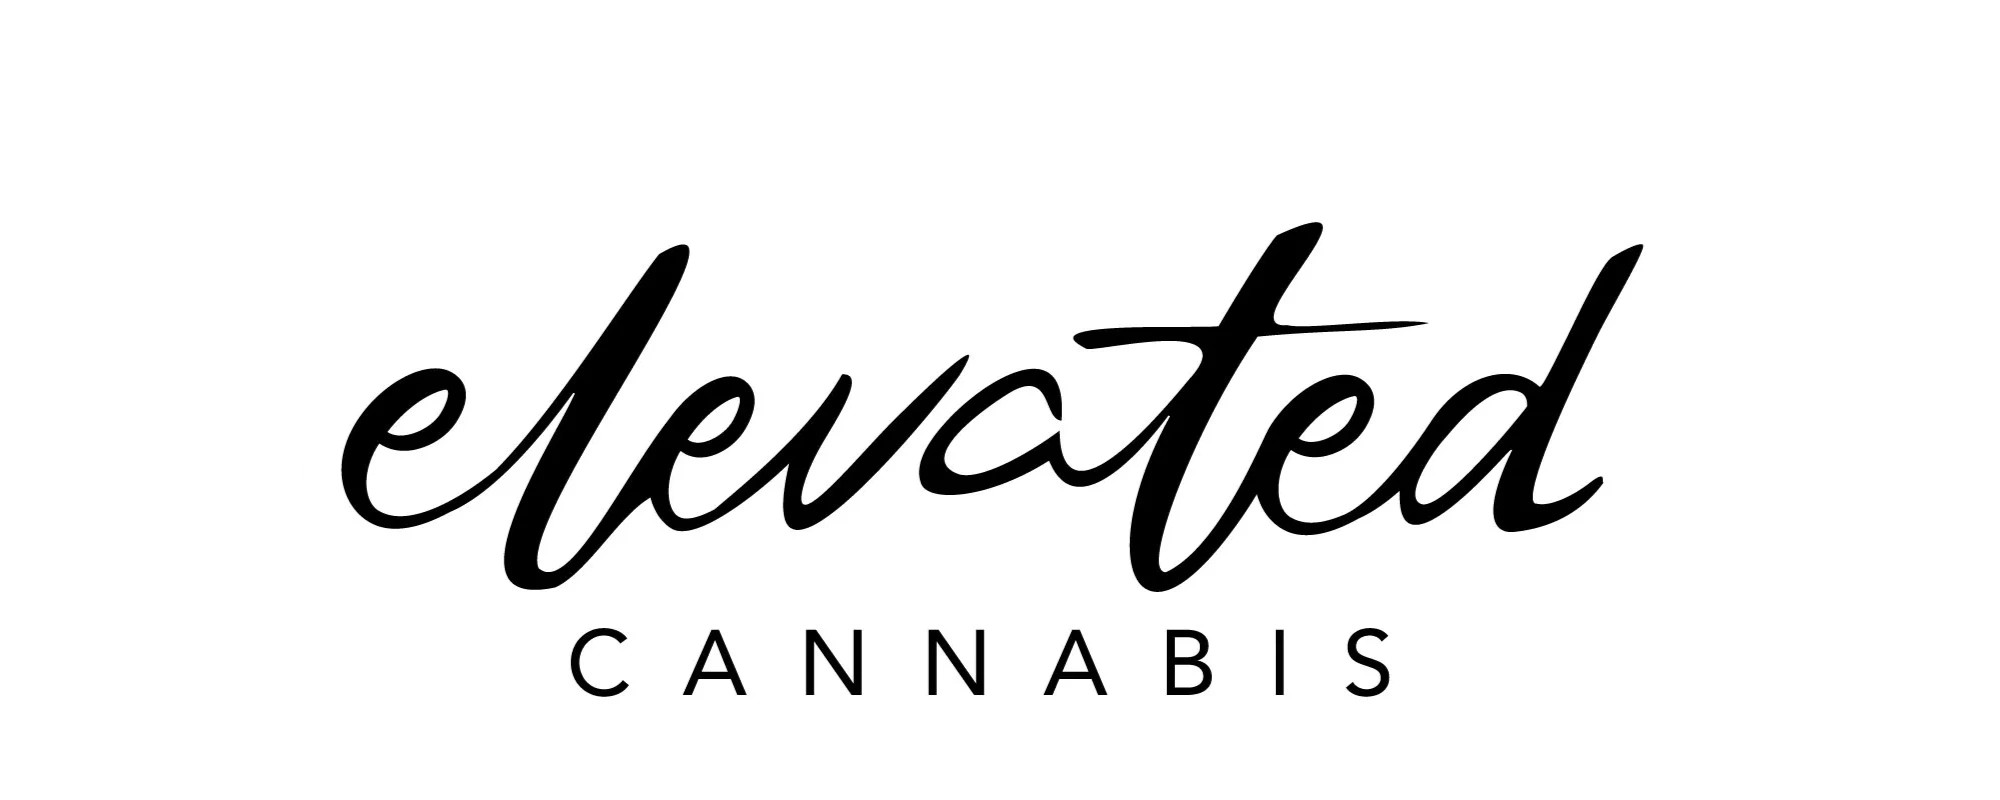 One of the Largest Direct Delivery Selections in Town - Elevated Cannabis